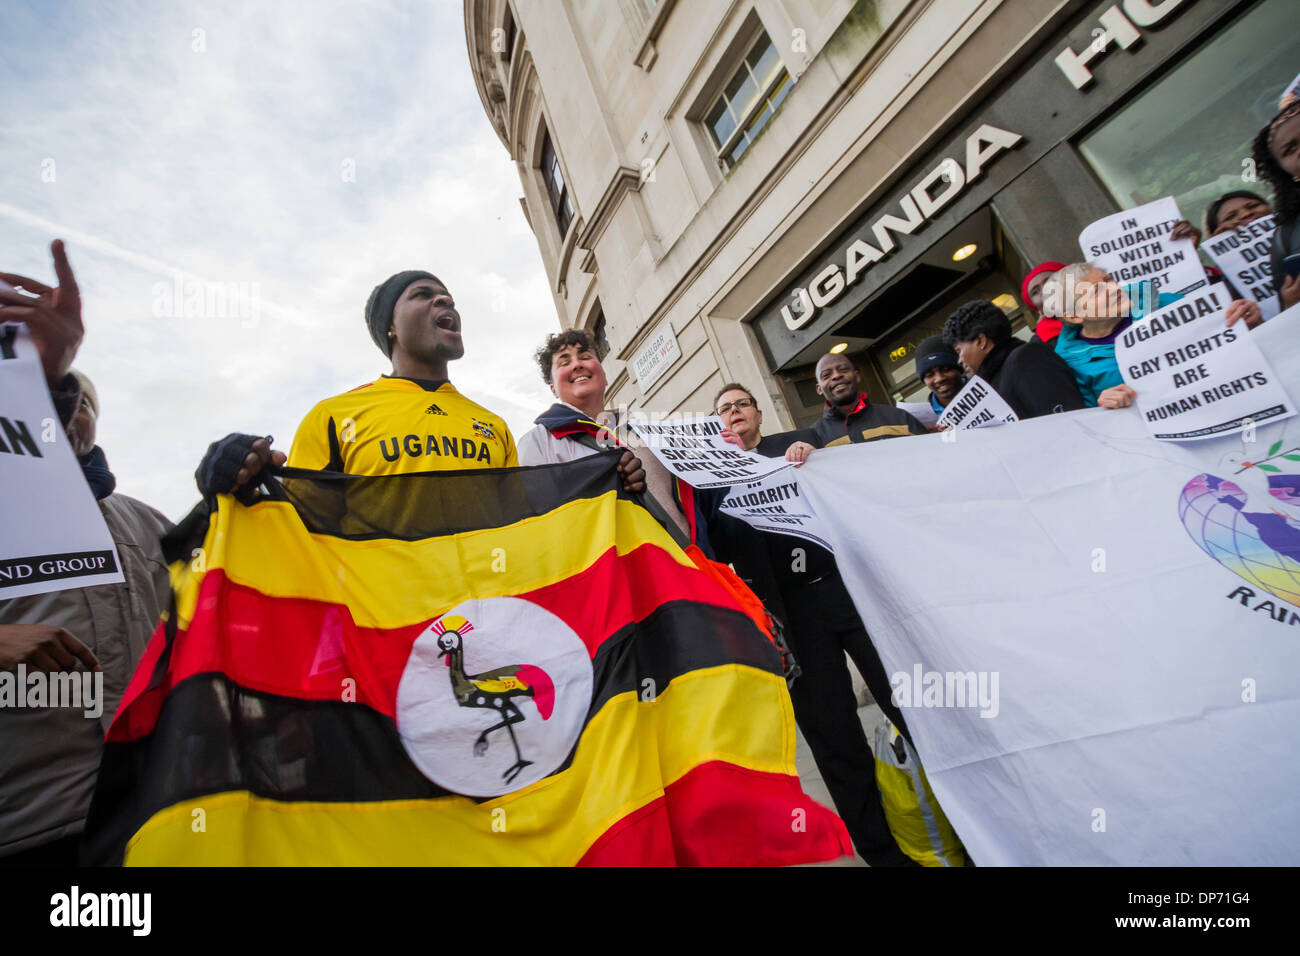 LGBTI Protest held outside The Ugandan High Commission Stock Photo